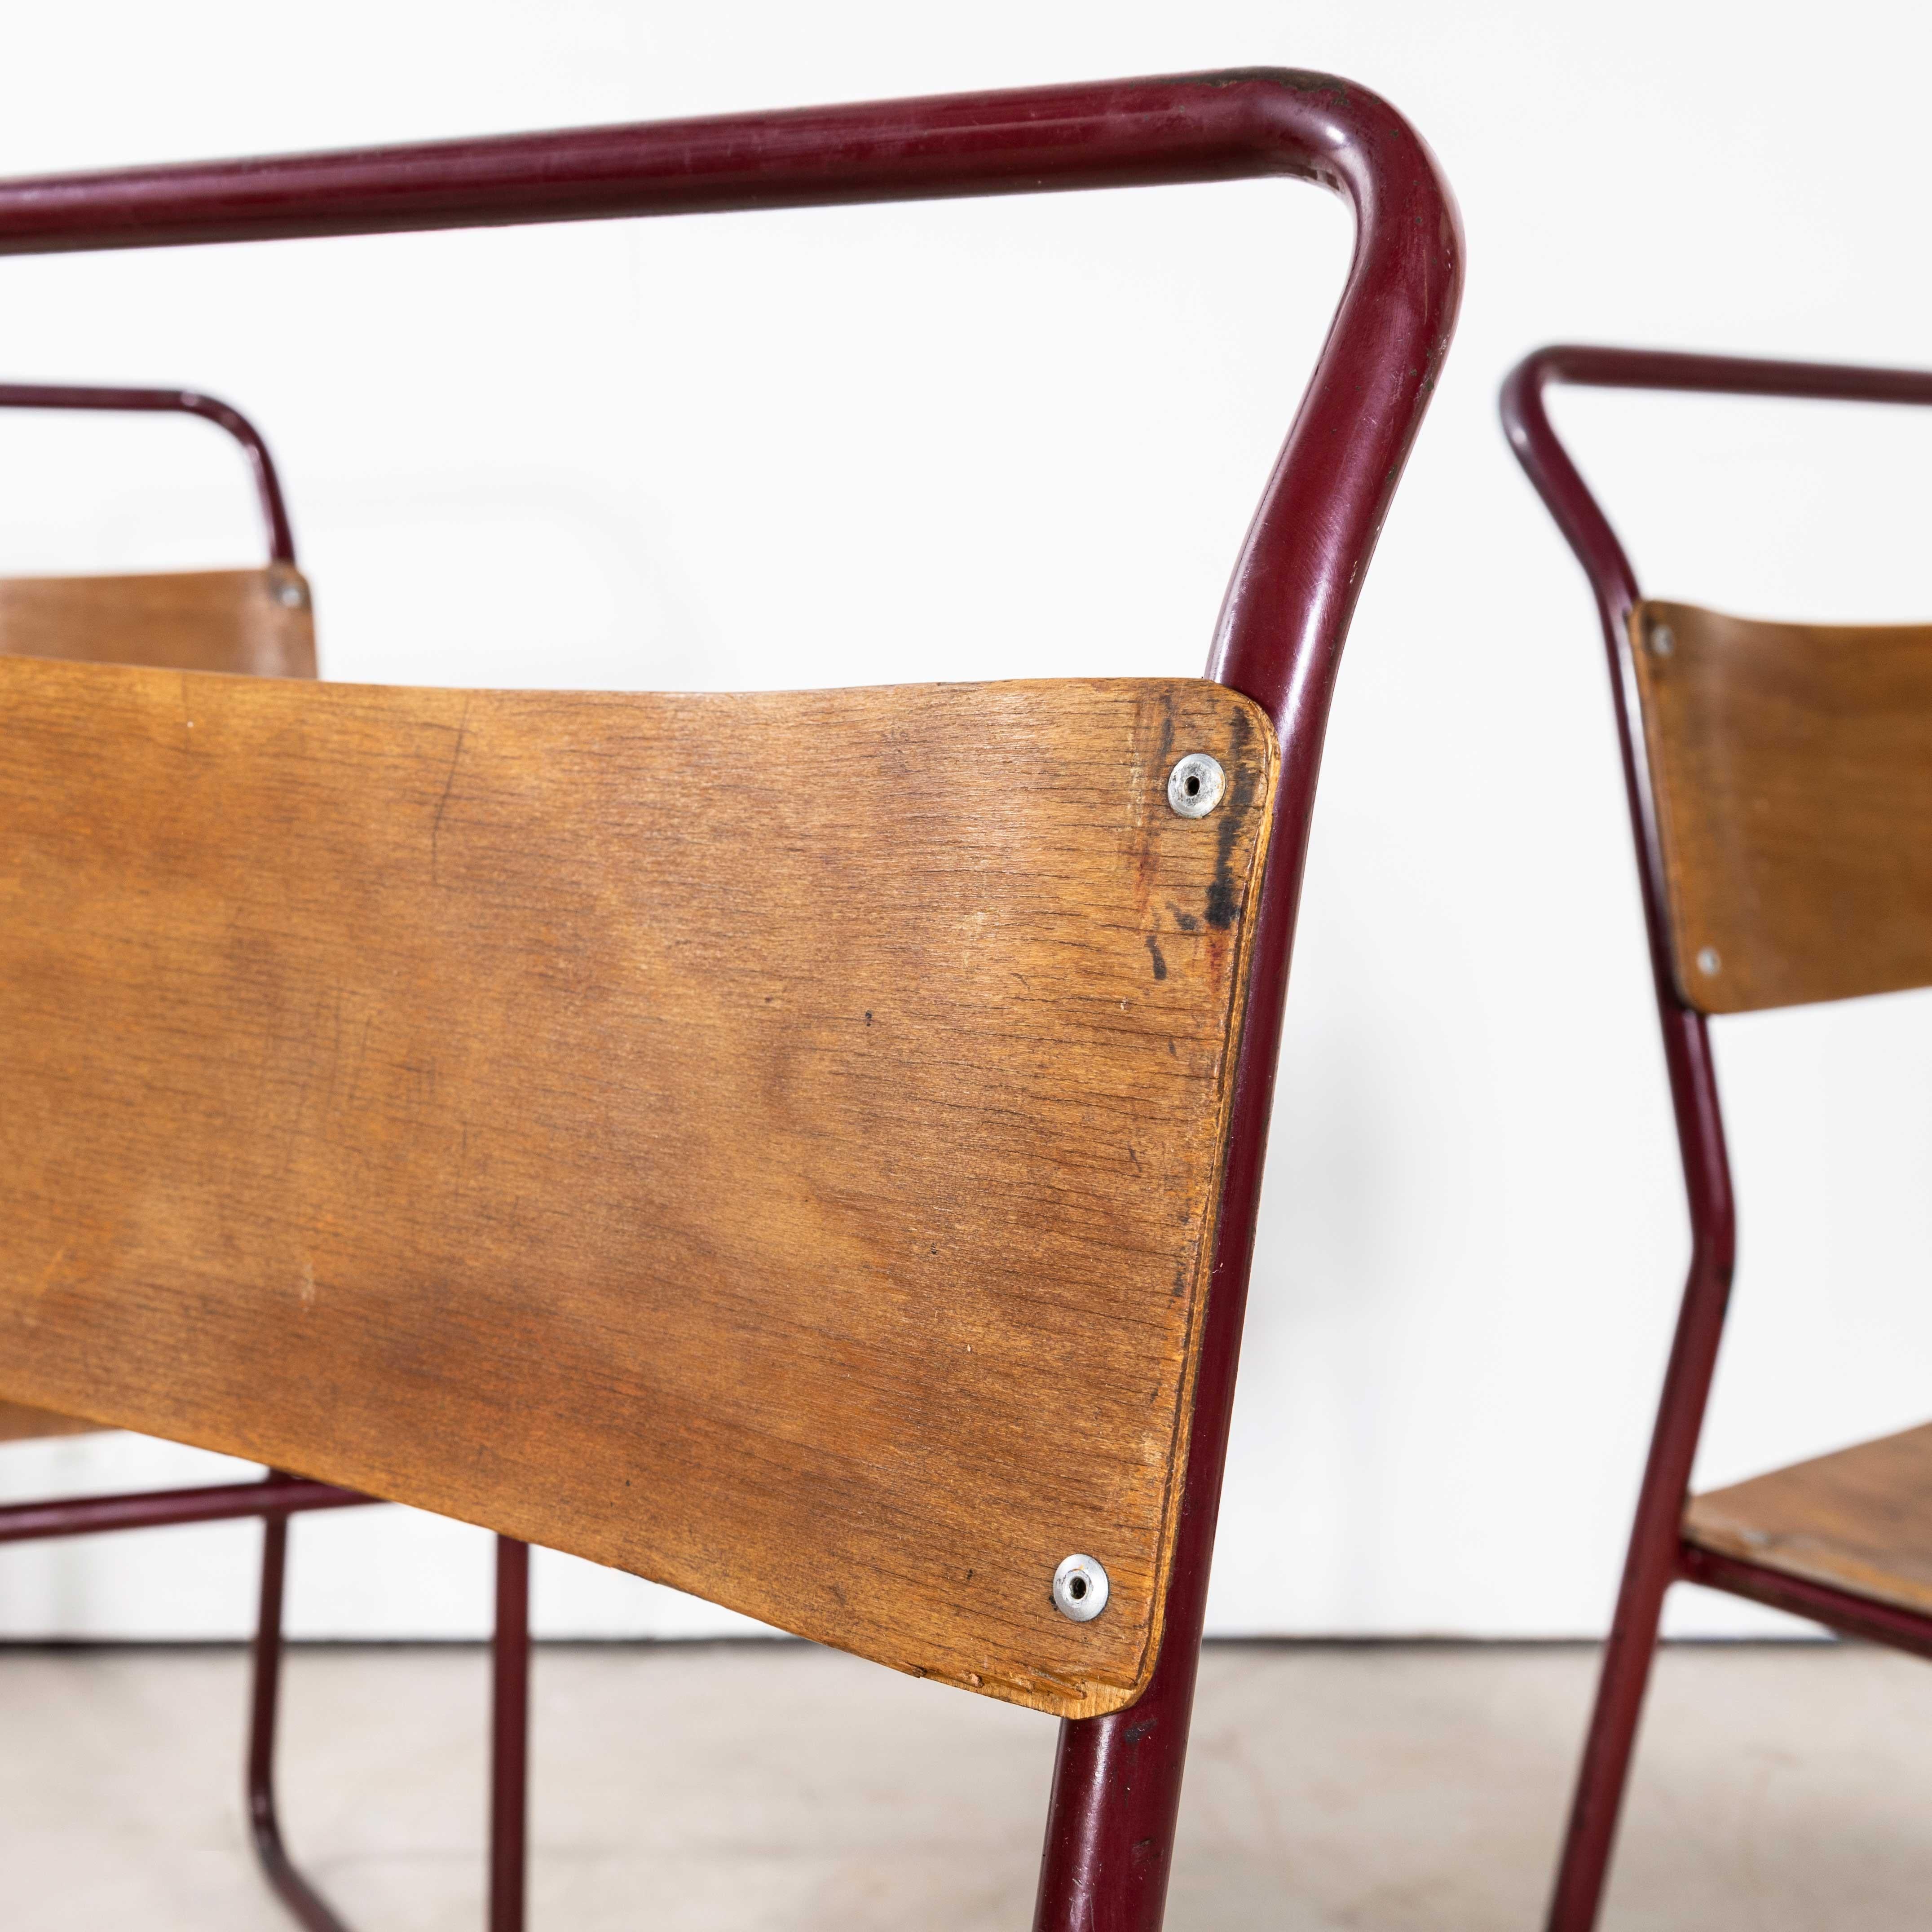 1950’s Burgundy Tubular Metal Dining Chairs Sebel – Good Quantity Available
1950’s Burgundy Tubular Metal Dining Chairs Sebel – Good Quantity Available. Sebel was one of several manufacturers who made this ubiquitous Bauhaus inspired chair. Sebel